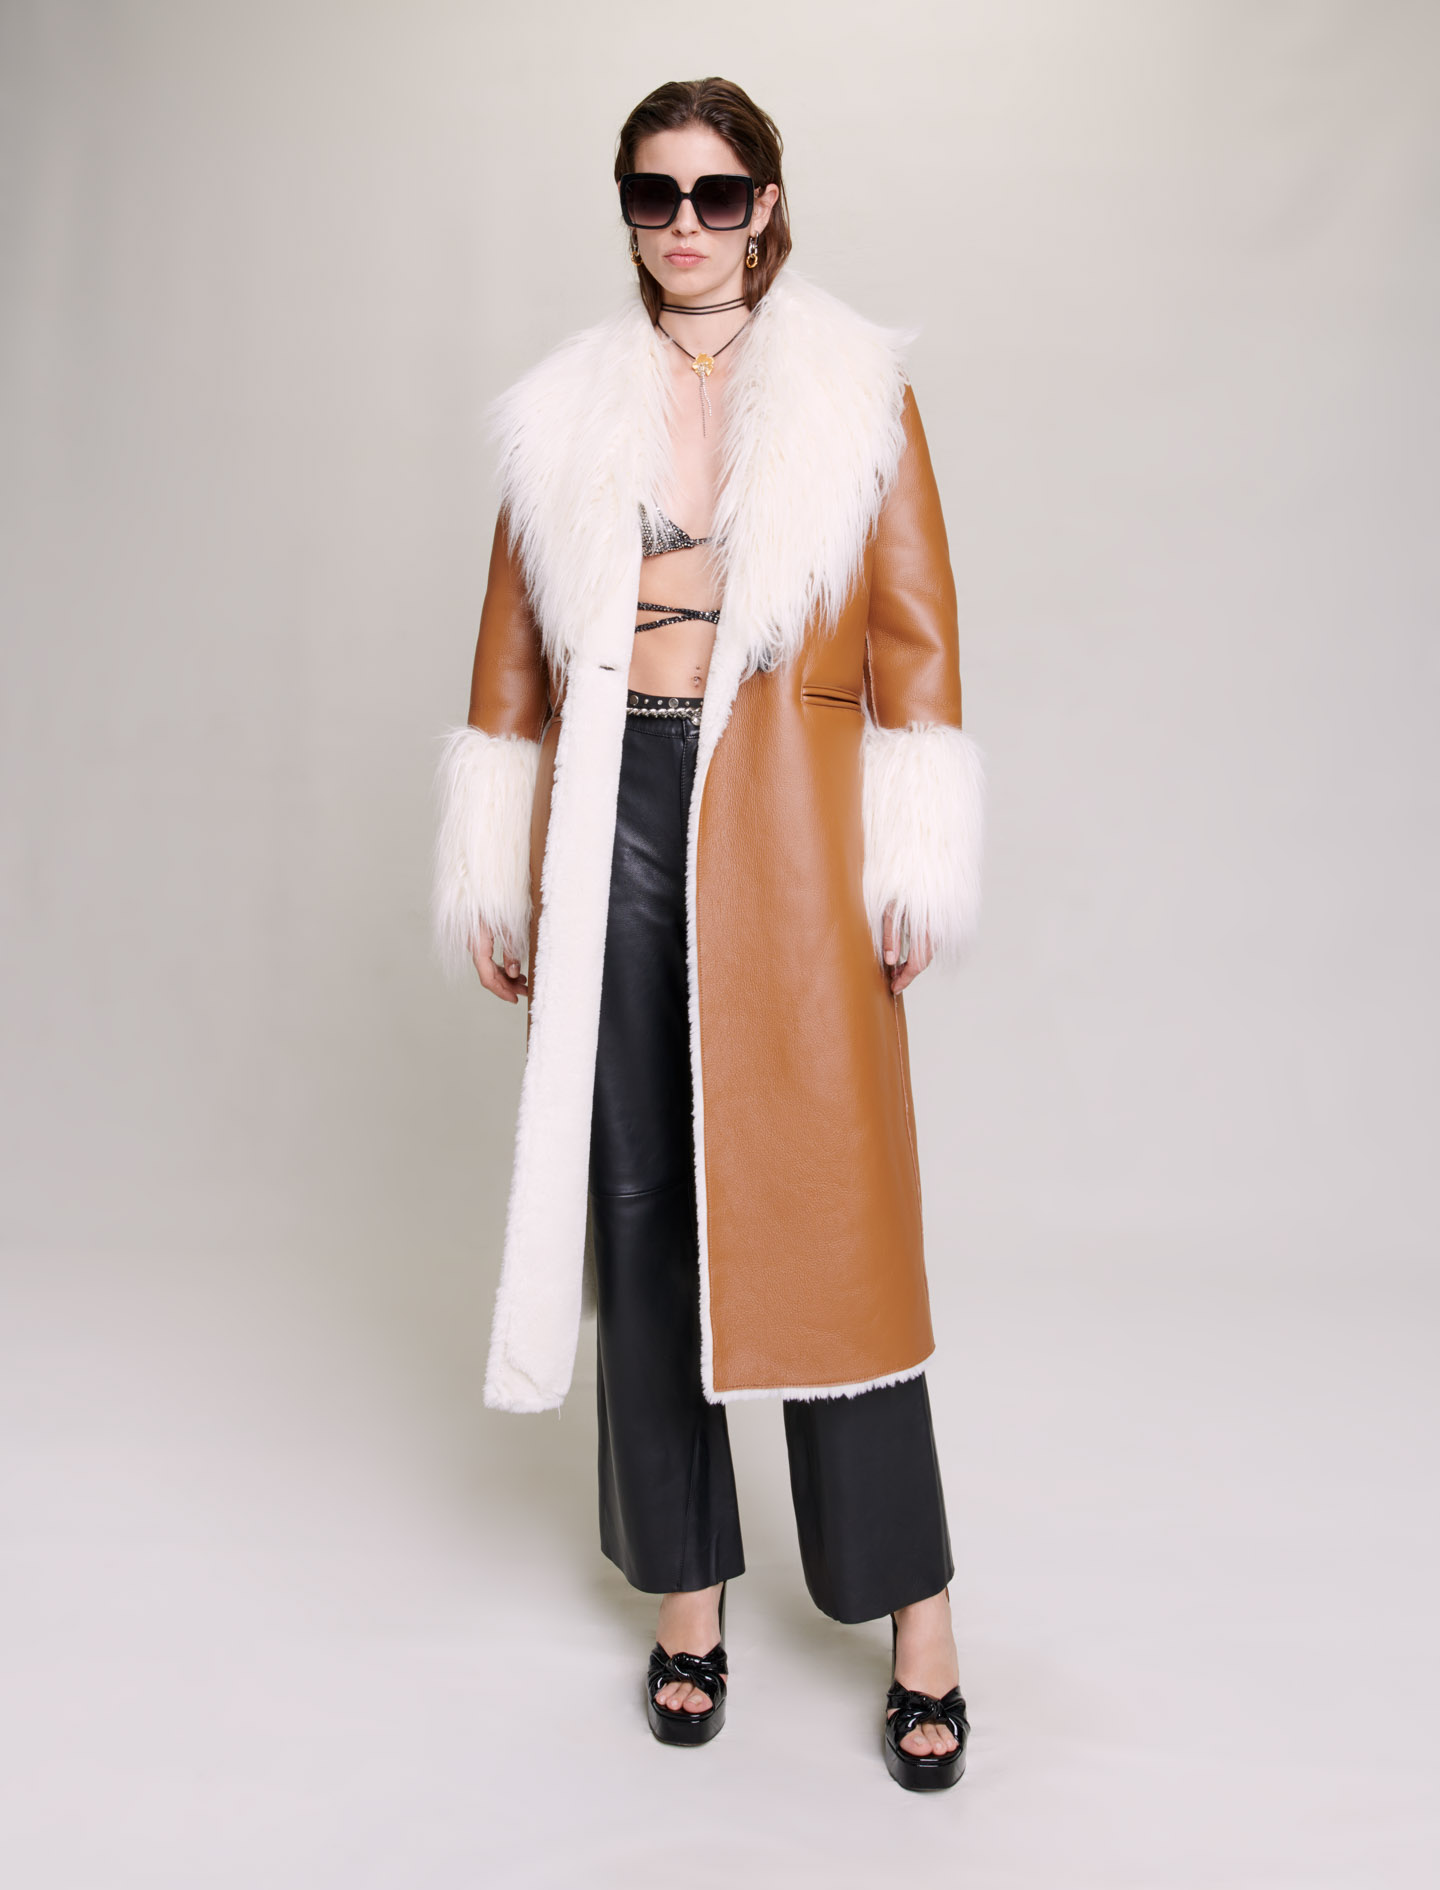 Maje Woman's polyester Coating: Long faux fur coat for Fall/Winter, in color Camel / Brown